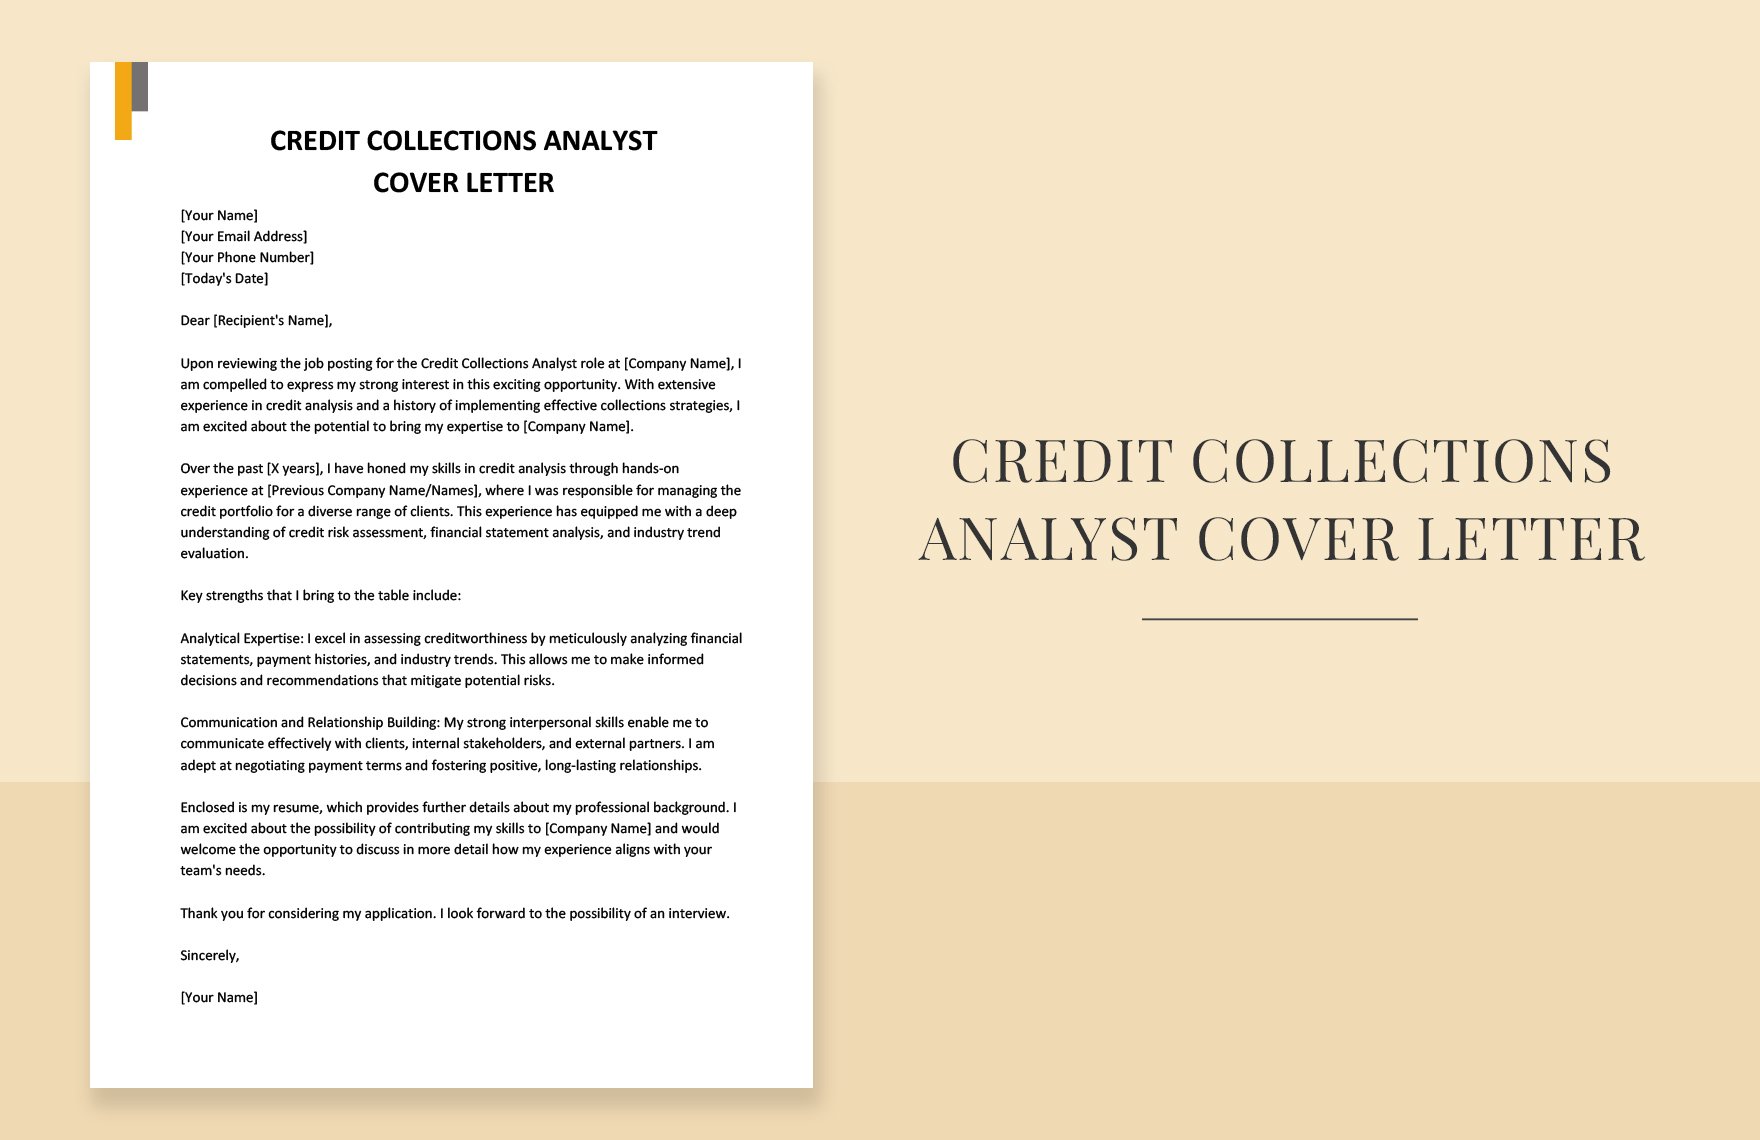 Credit Collections Analyst Cover Letter